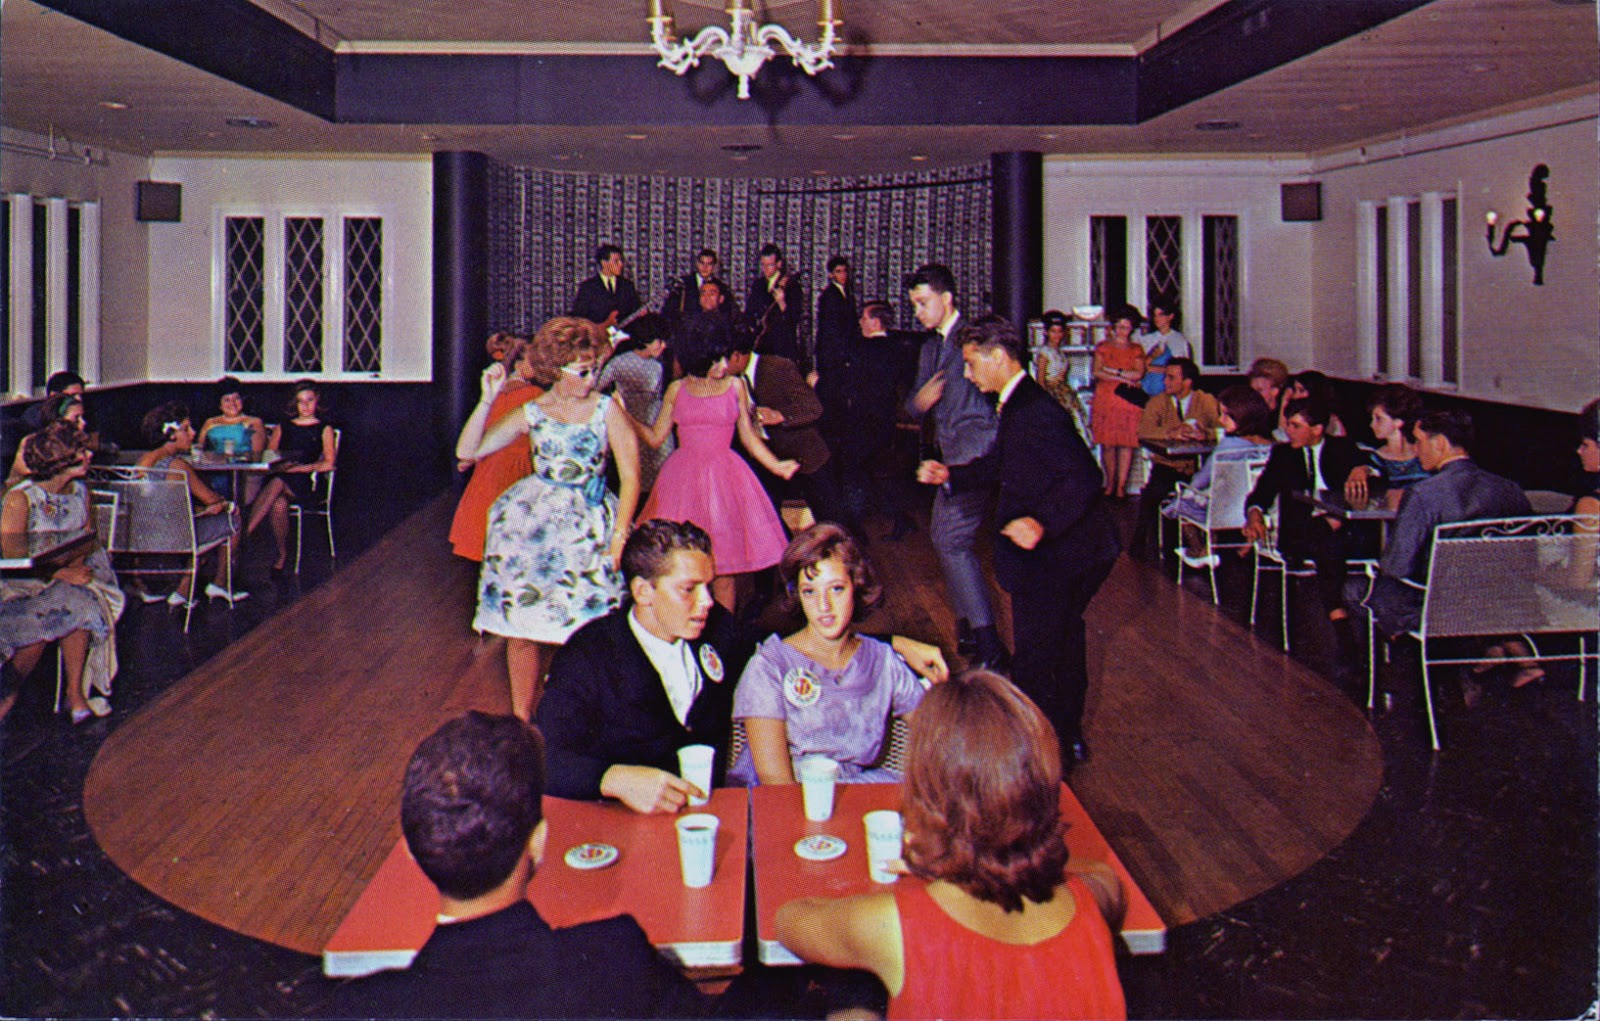 Amazing Color Photos Of Teenage Dance Parties And Disco From The 1960s And 1970s Vintage News